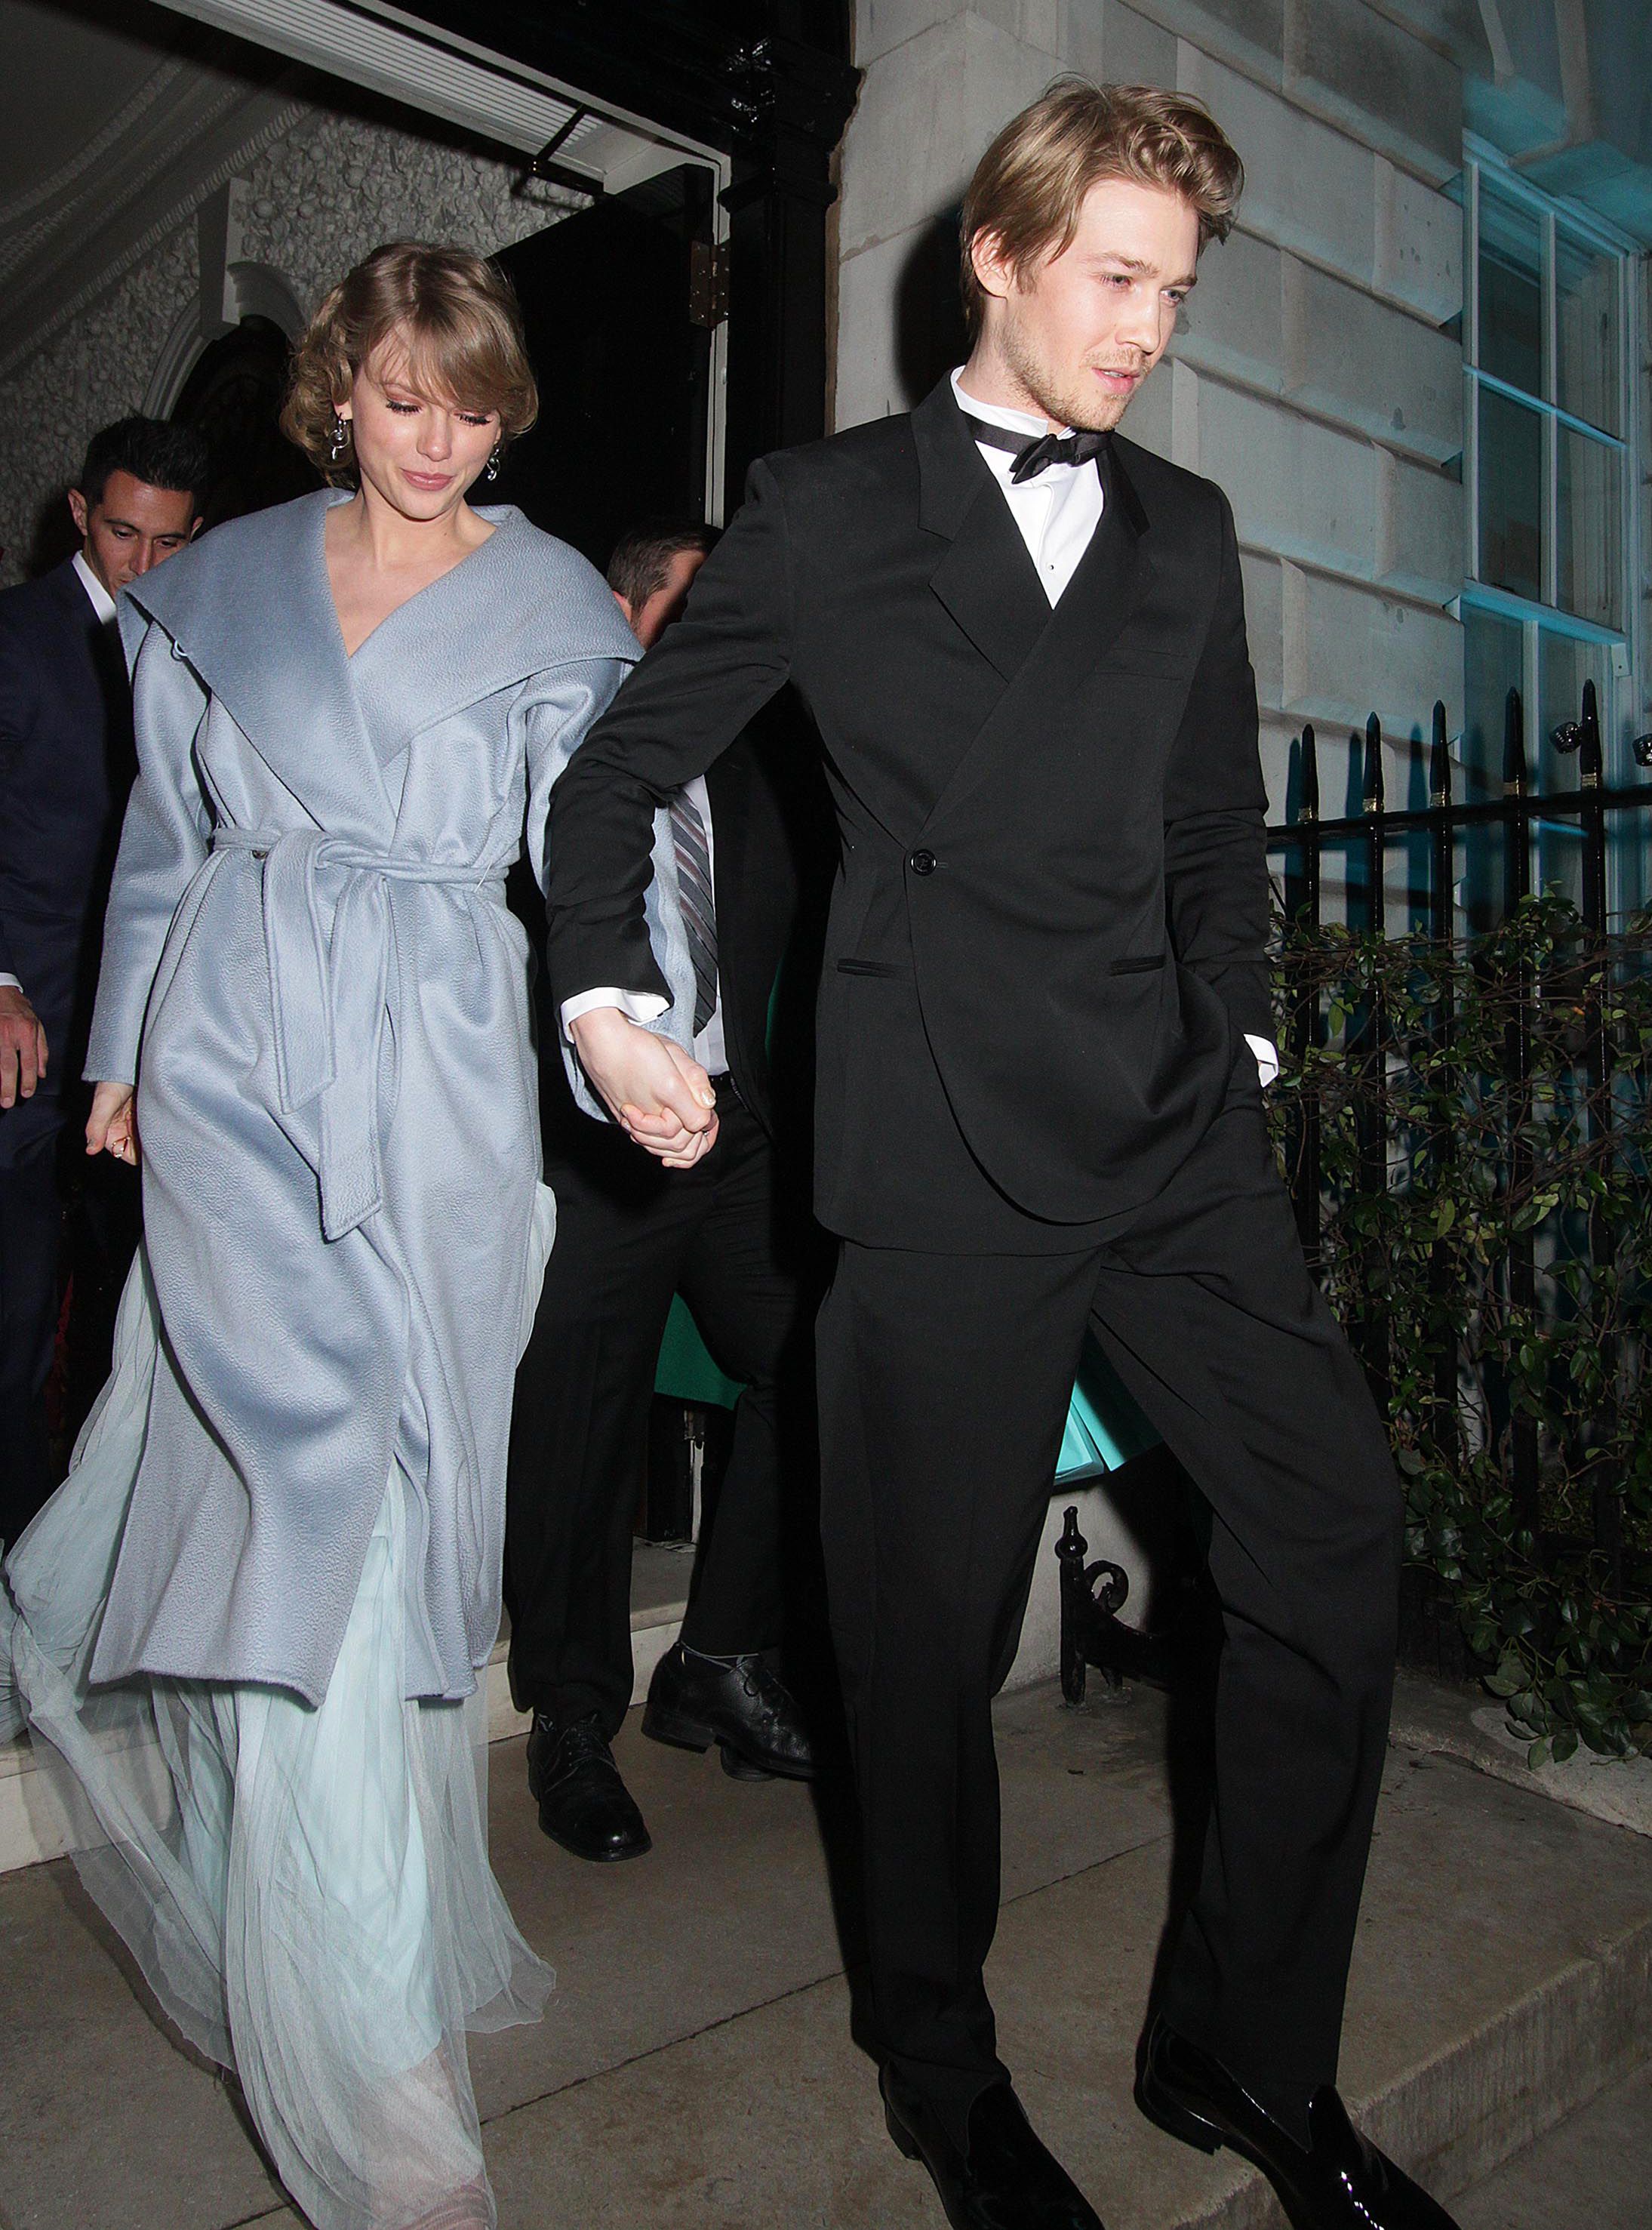 Taylor previously dated actor Joe Alwyn